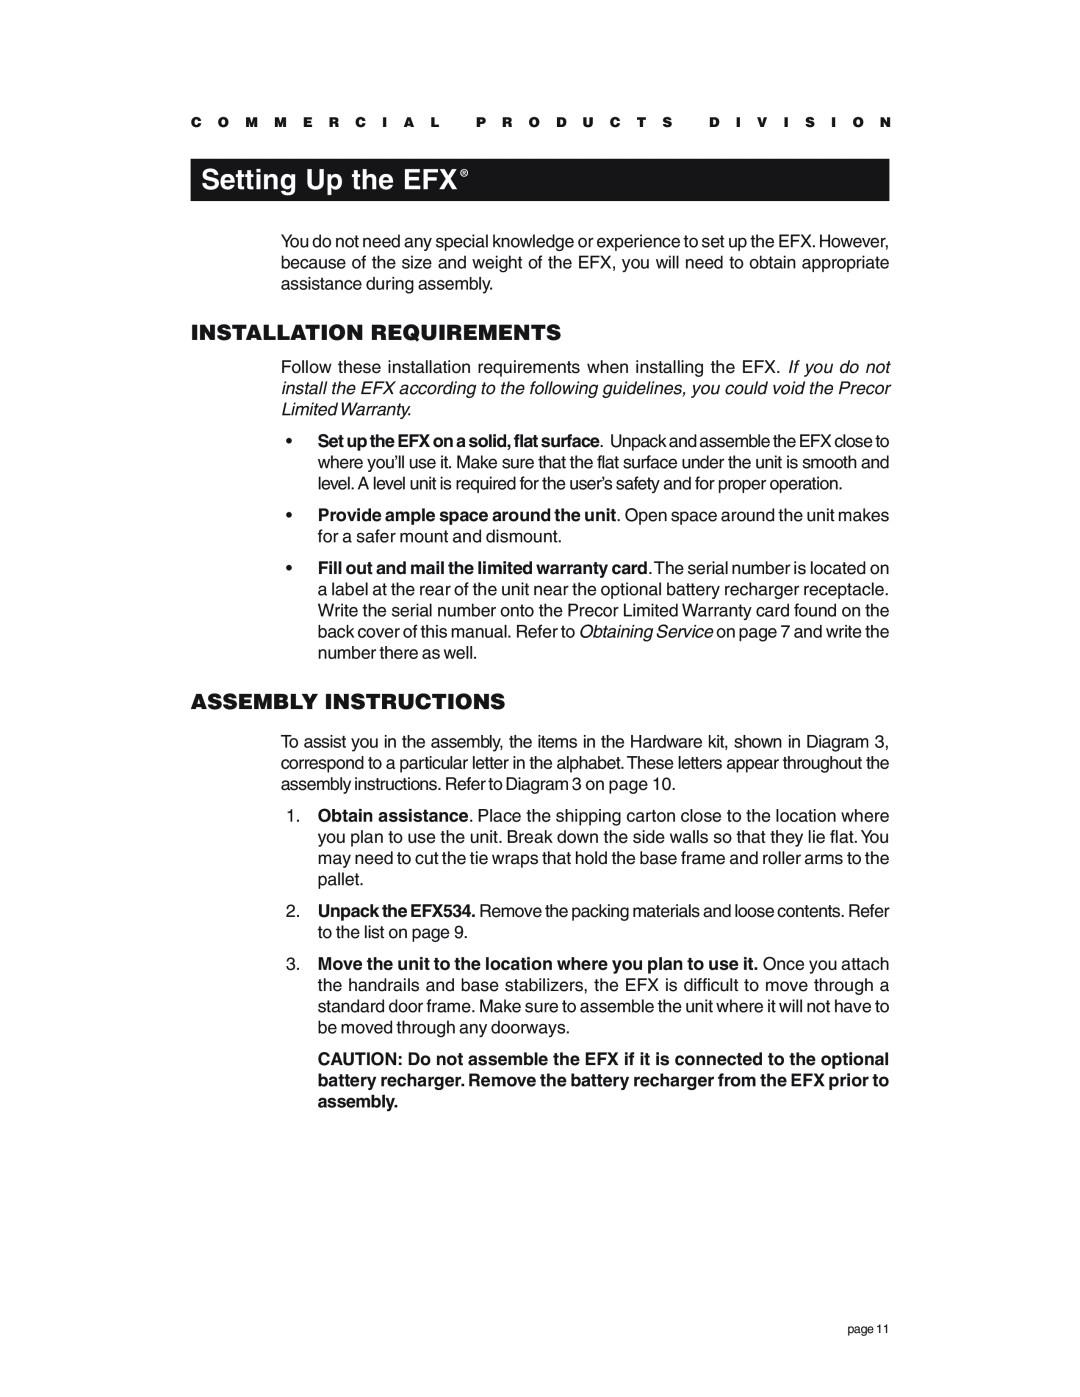 Precor EFX534 owner manual Setting Up the EFX, Installation Requirements, Assembly Instructions 